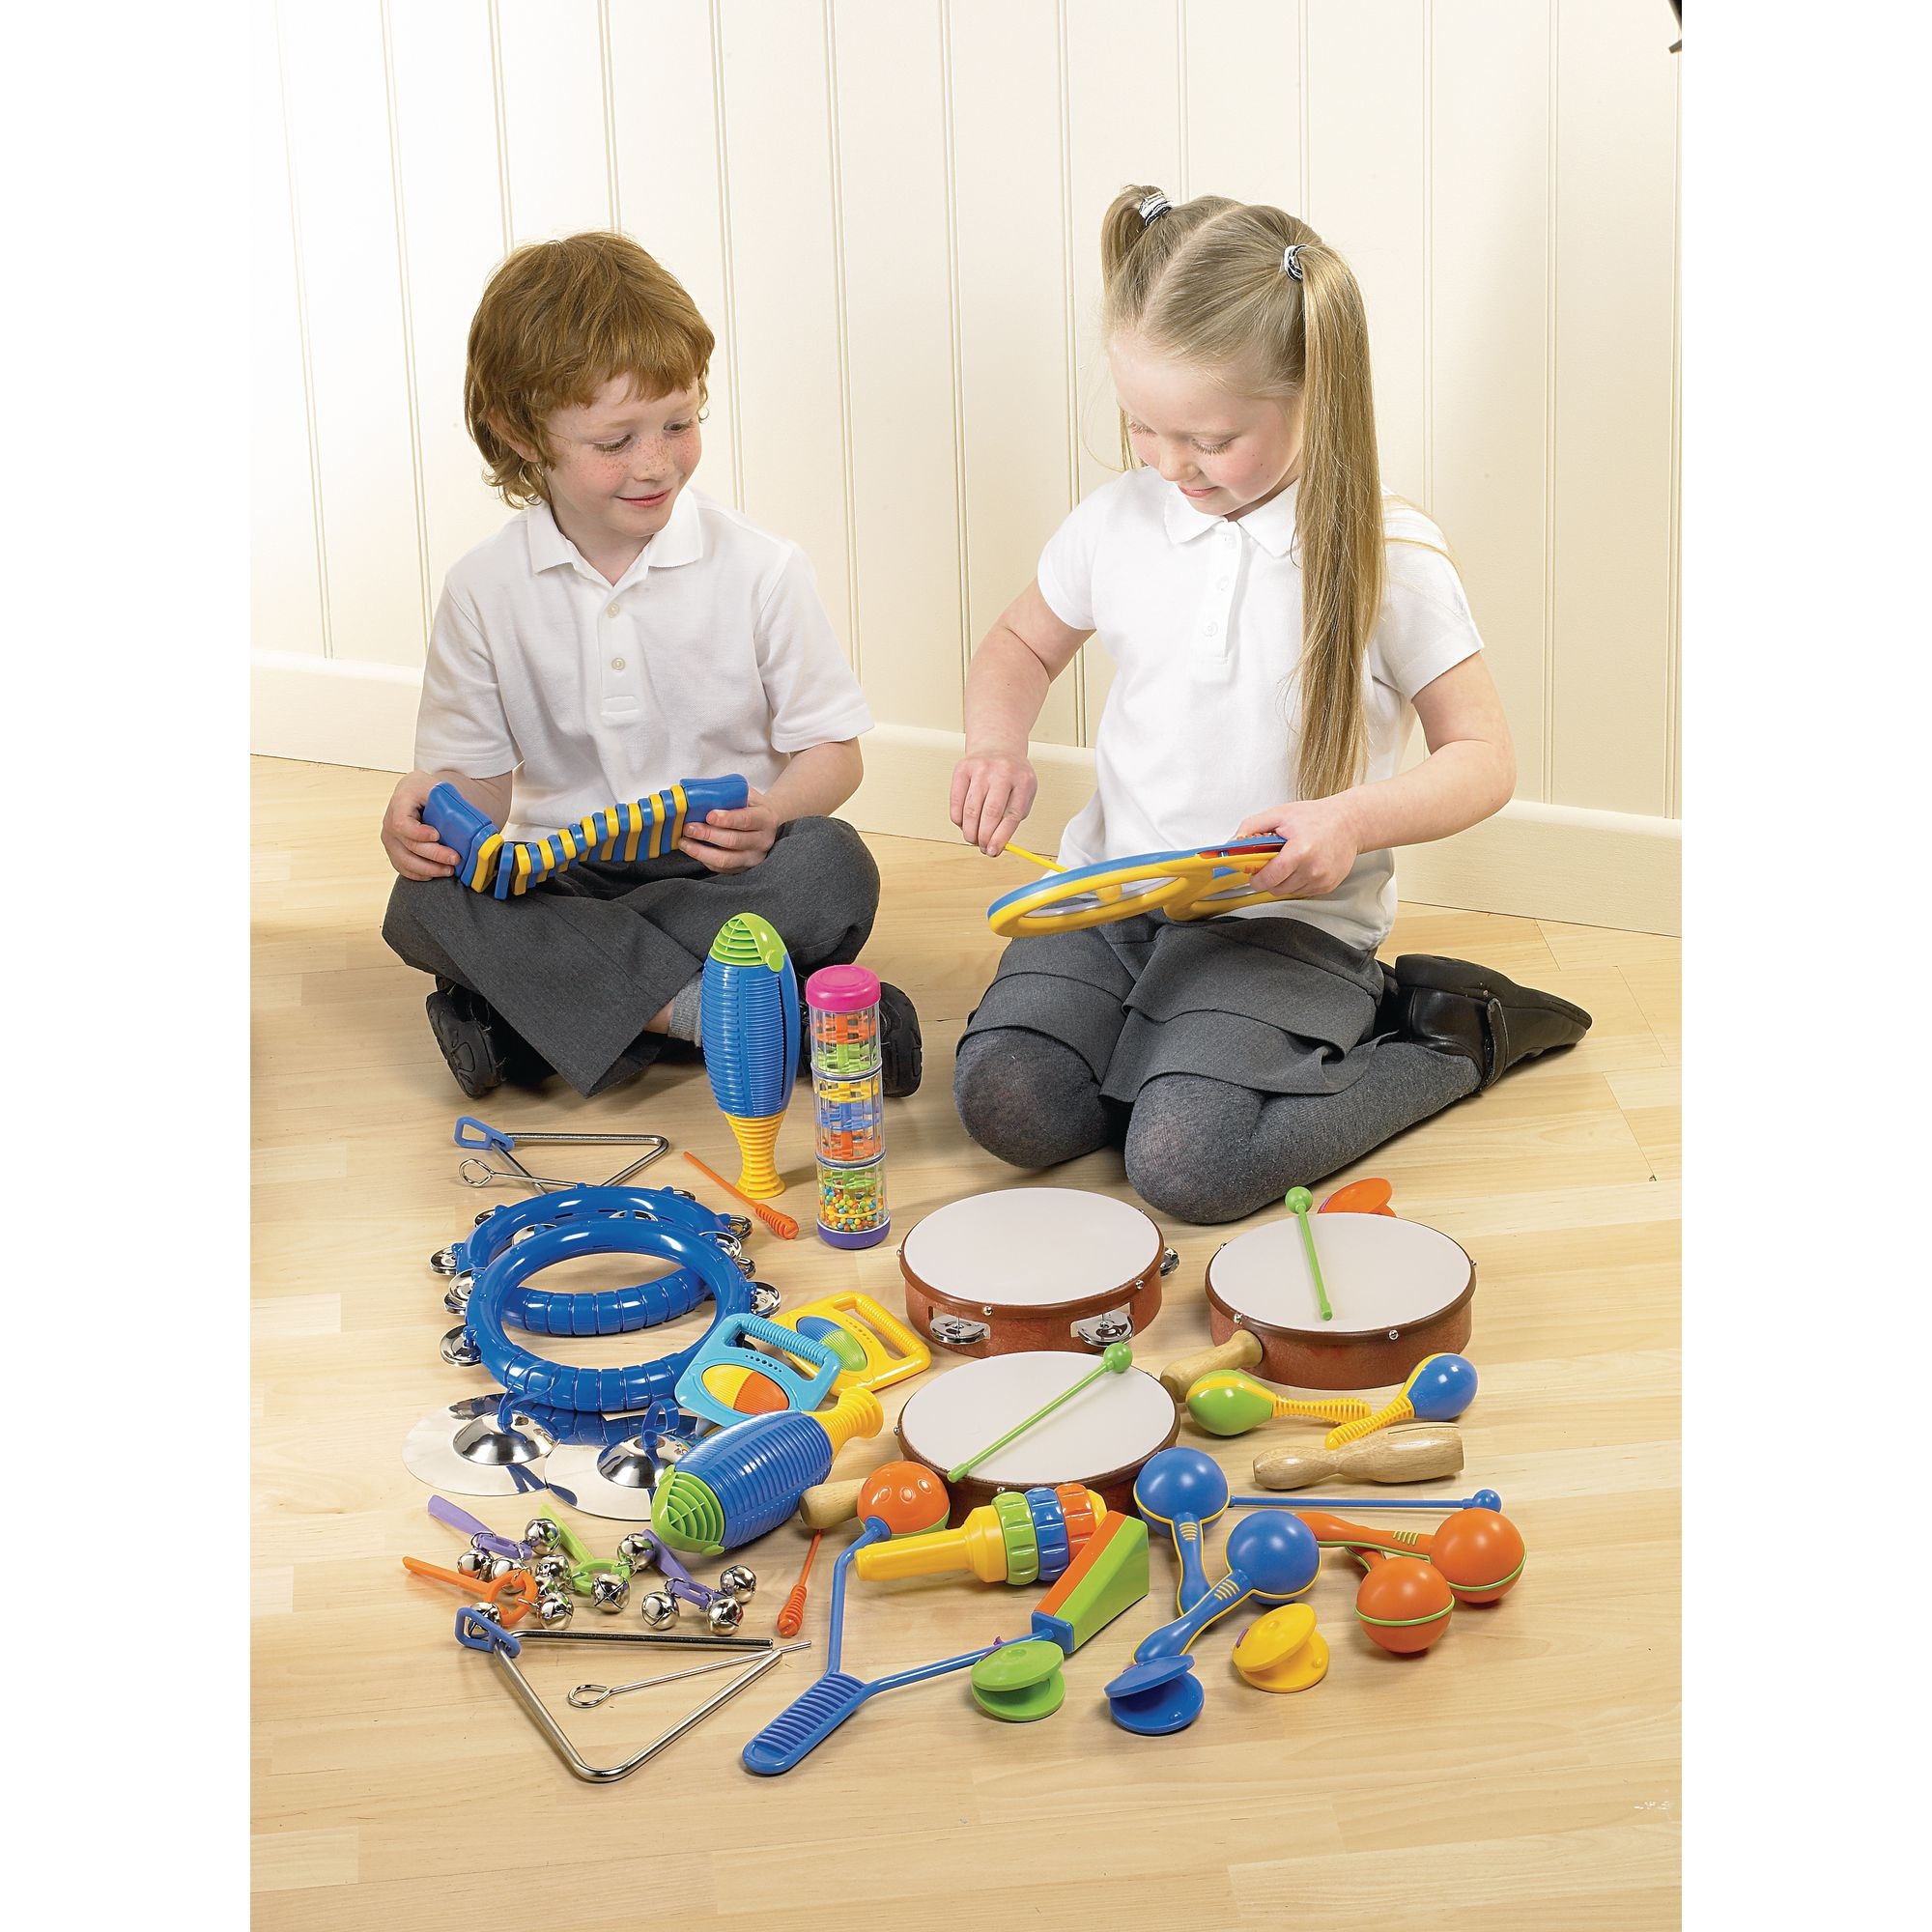 Musical Instruments Set - Pack of 30